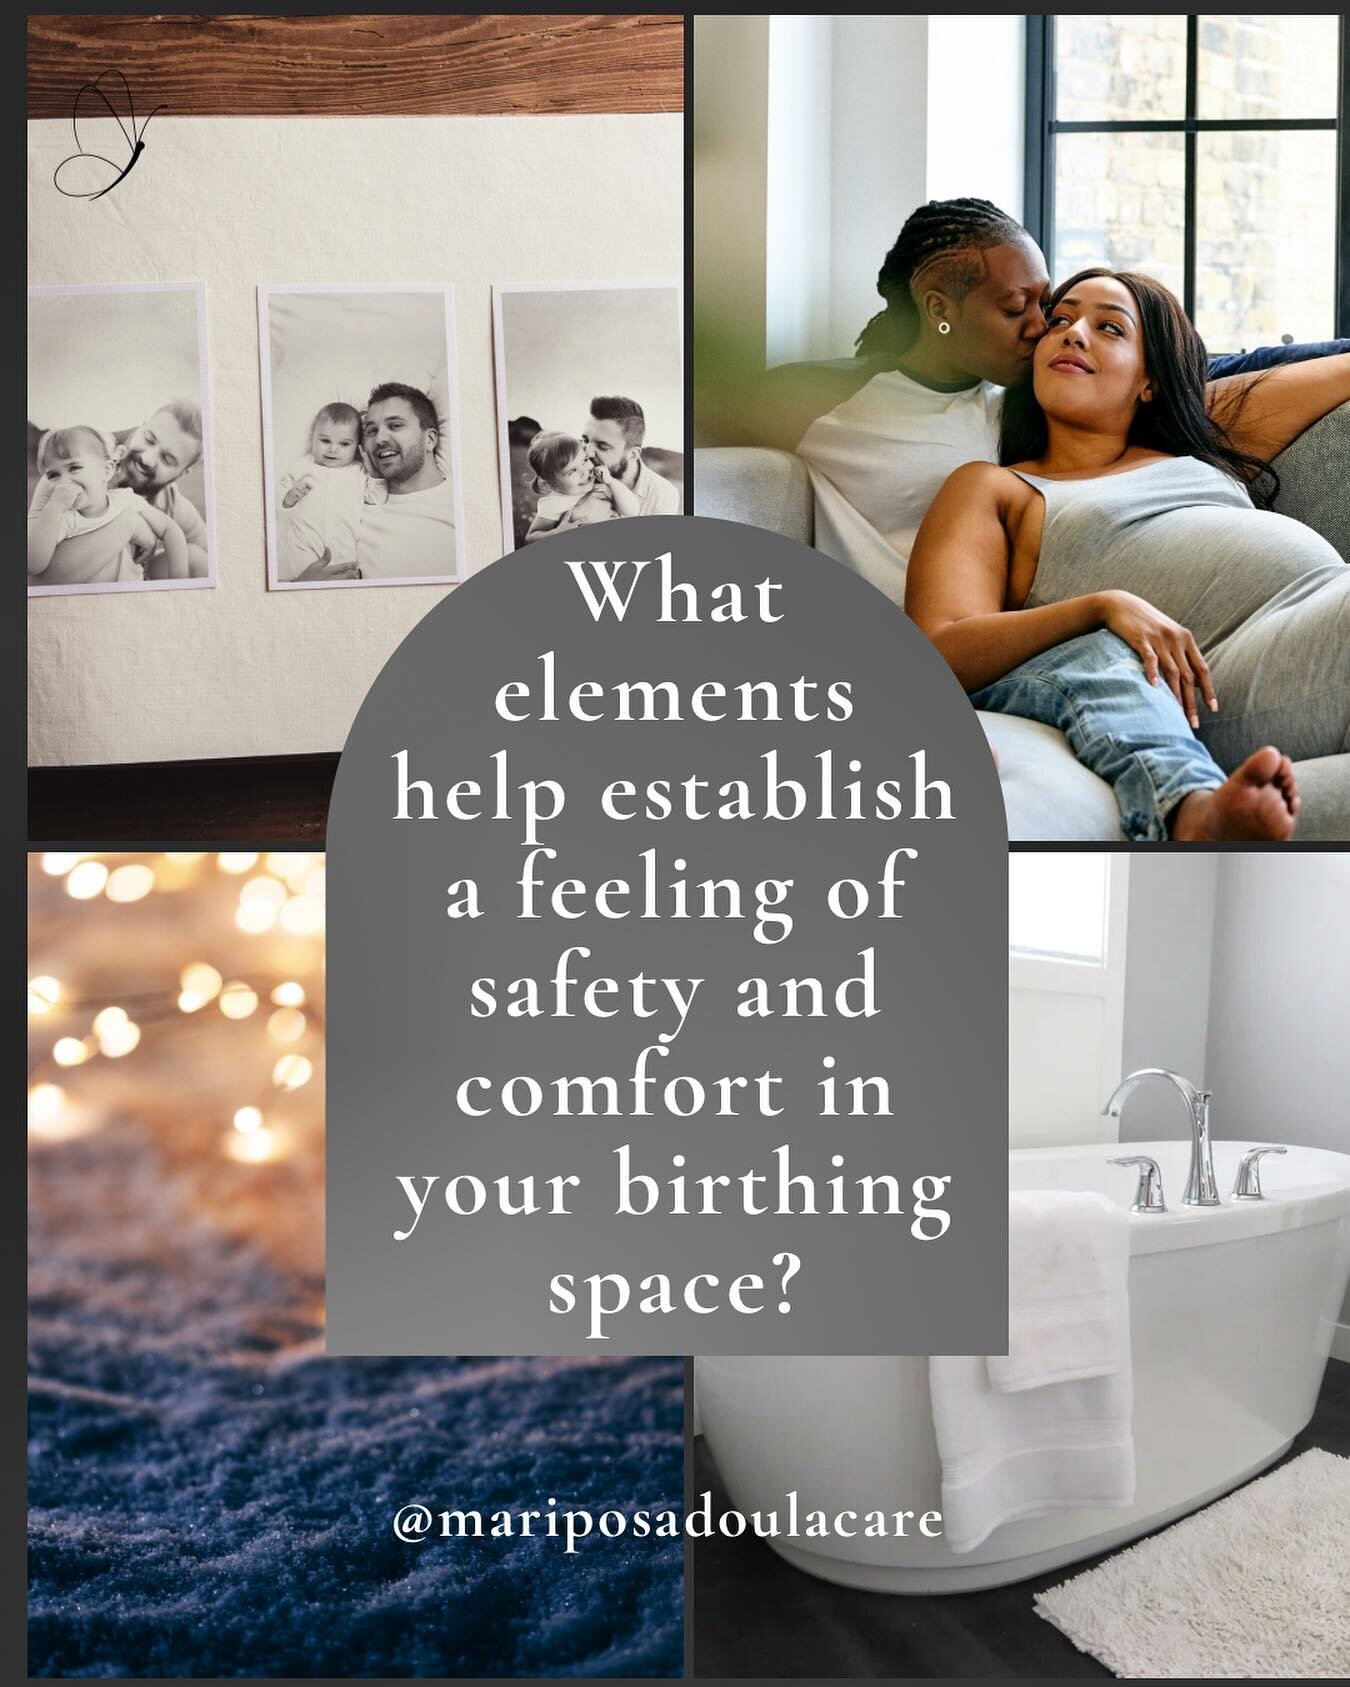 ✨birth space✨

Our birth space (whether at home, birth center or hospital) is sacred. You have the ability to decide how you&rsquo;d like to design your birth space to your liking. There can be limitations to what you may do (no candles in hospitals 